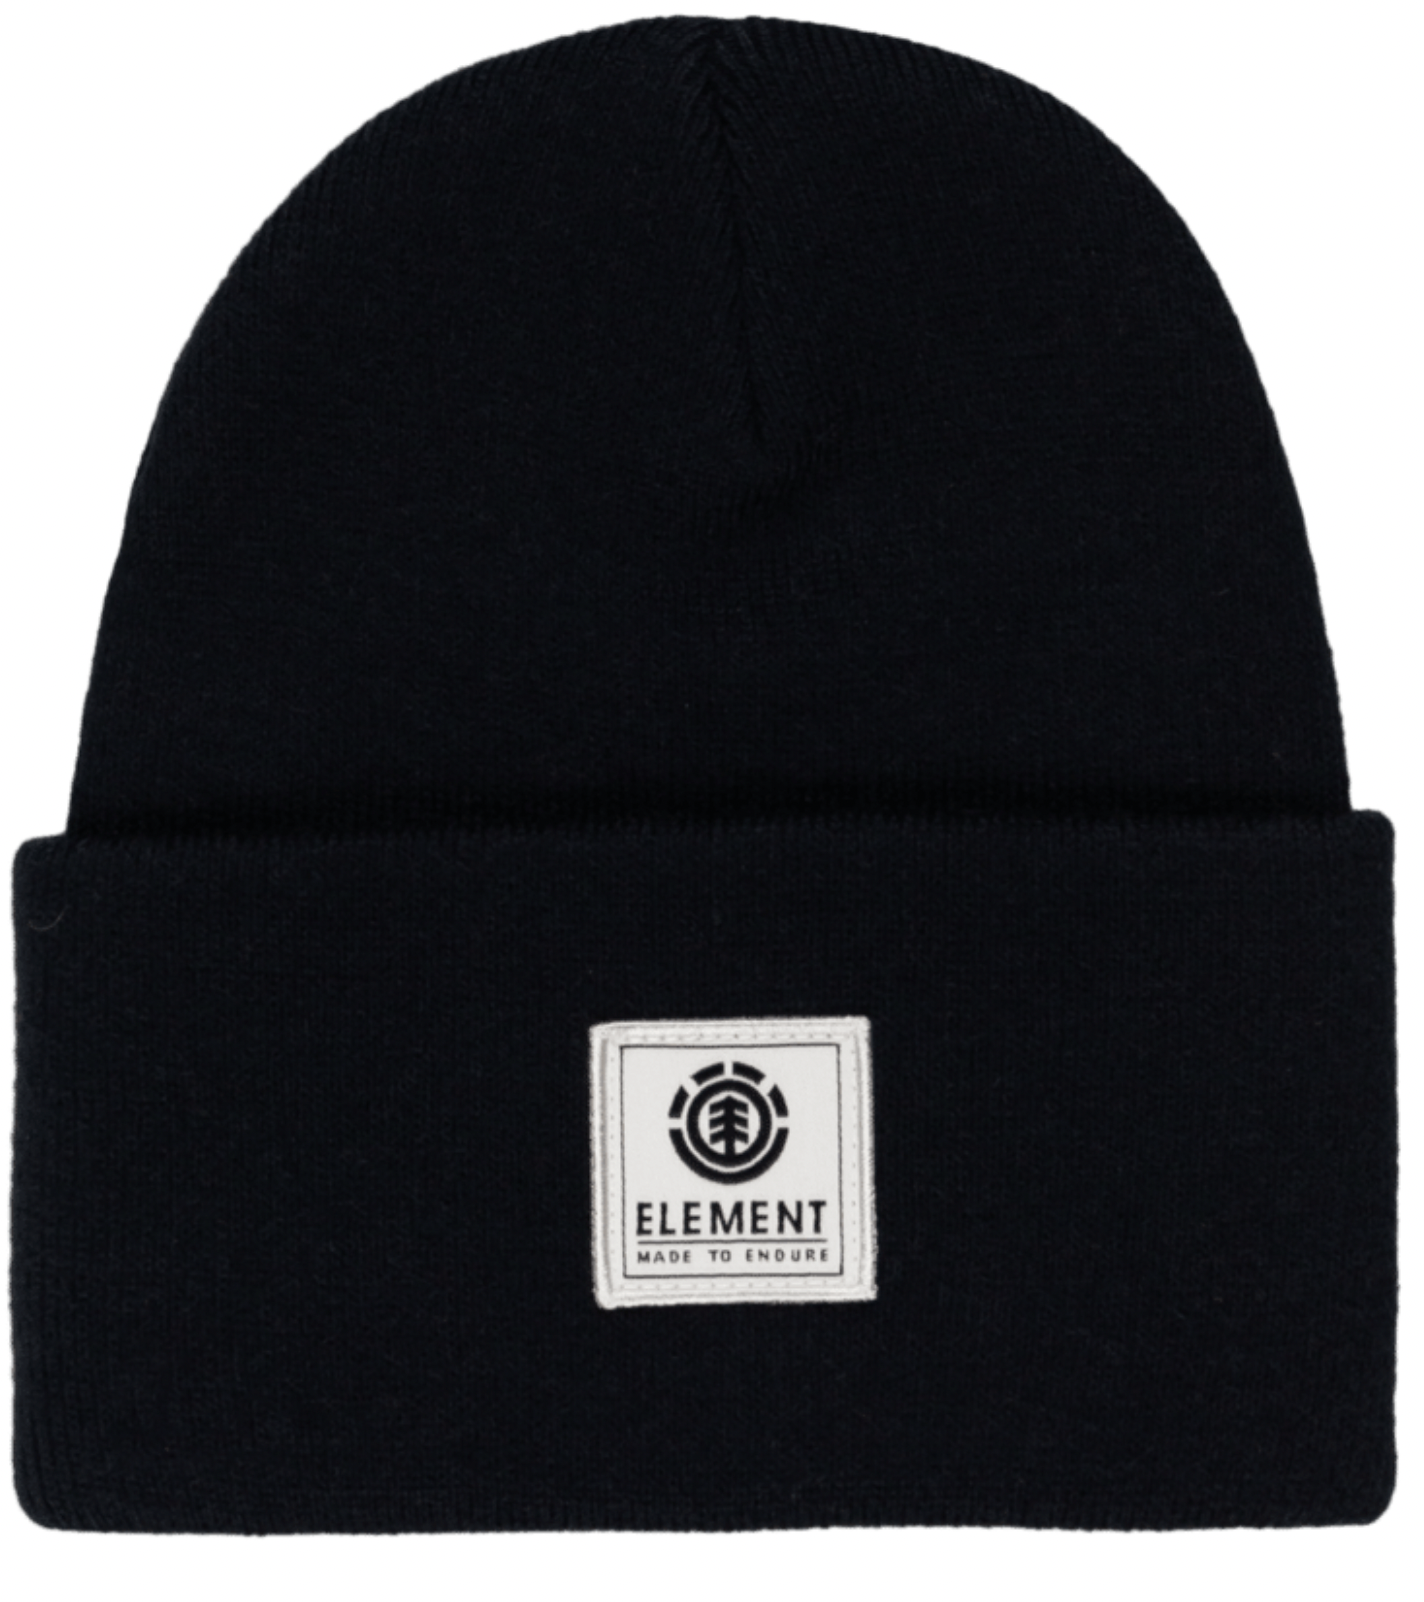 YOUTH BEANIE ELEMENT